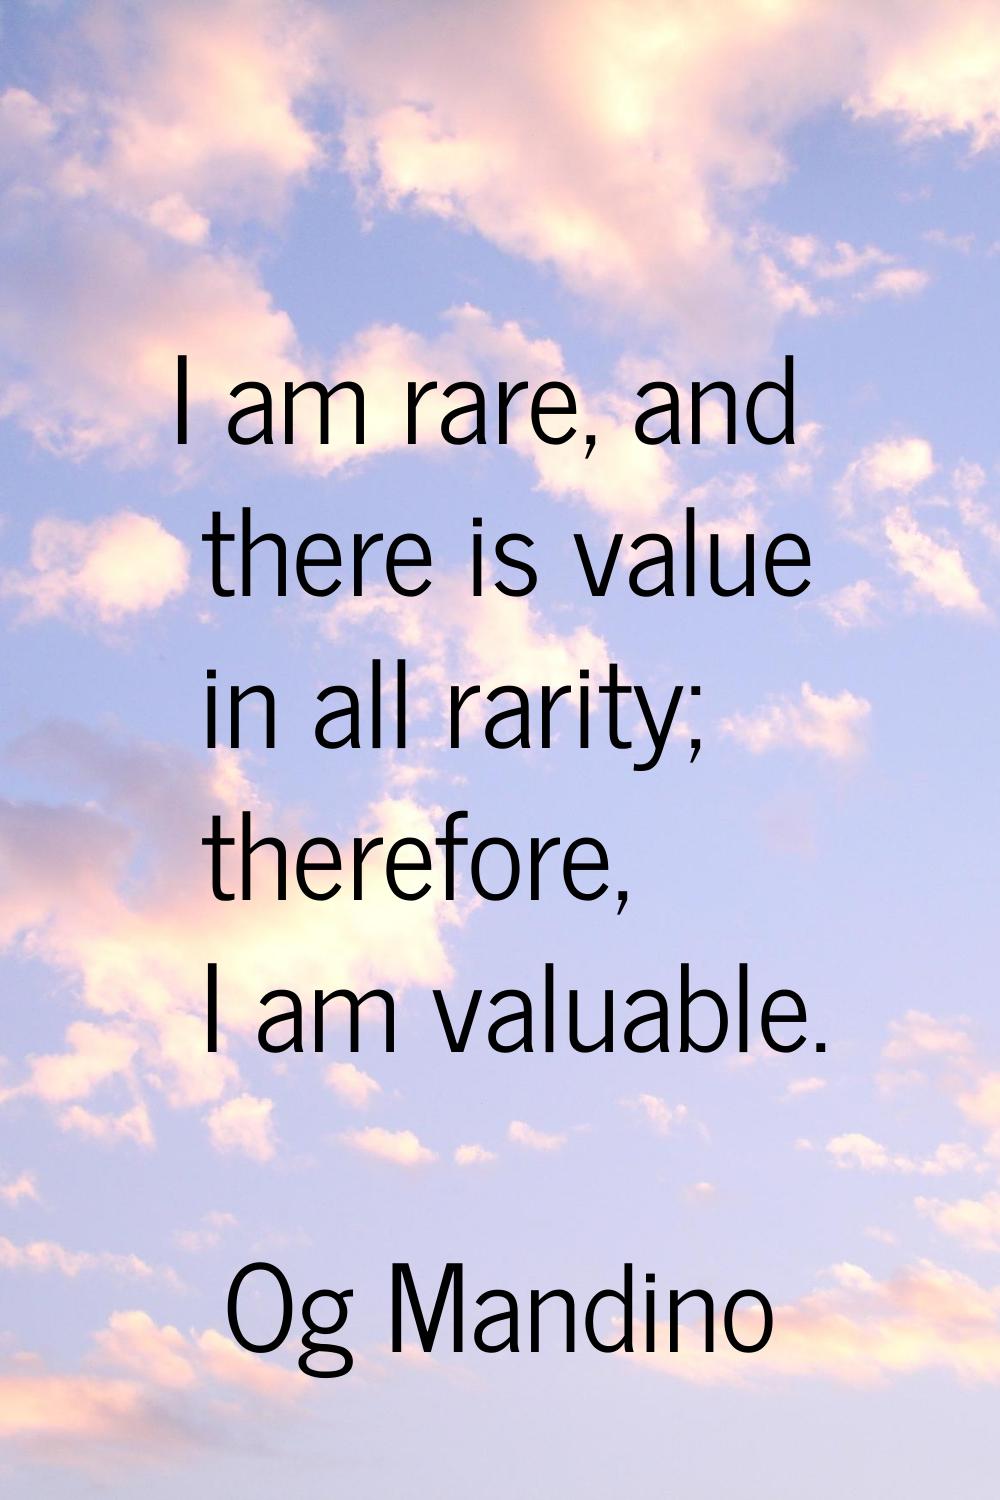 I am rare, and there is value in all rarity; therefore, I am valuable.